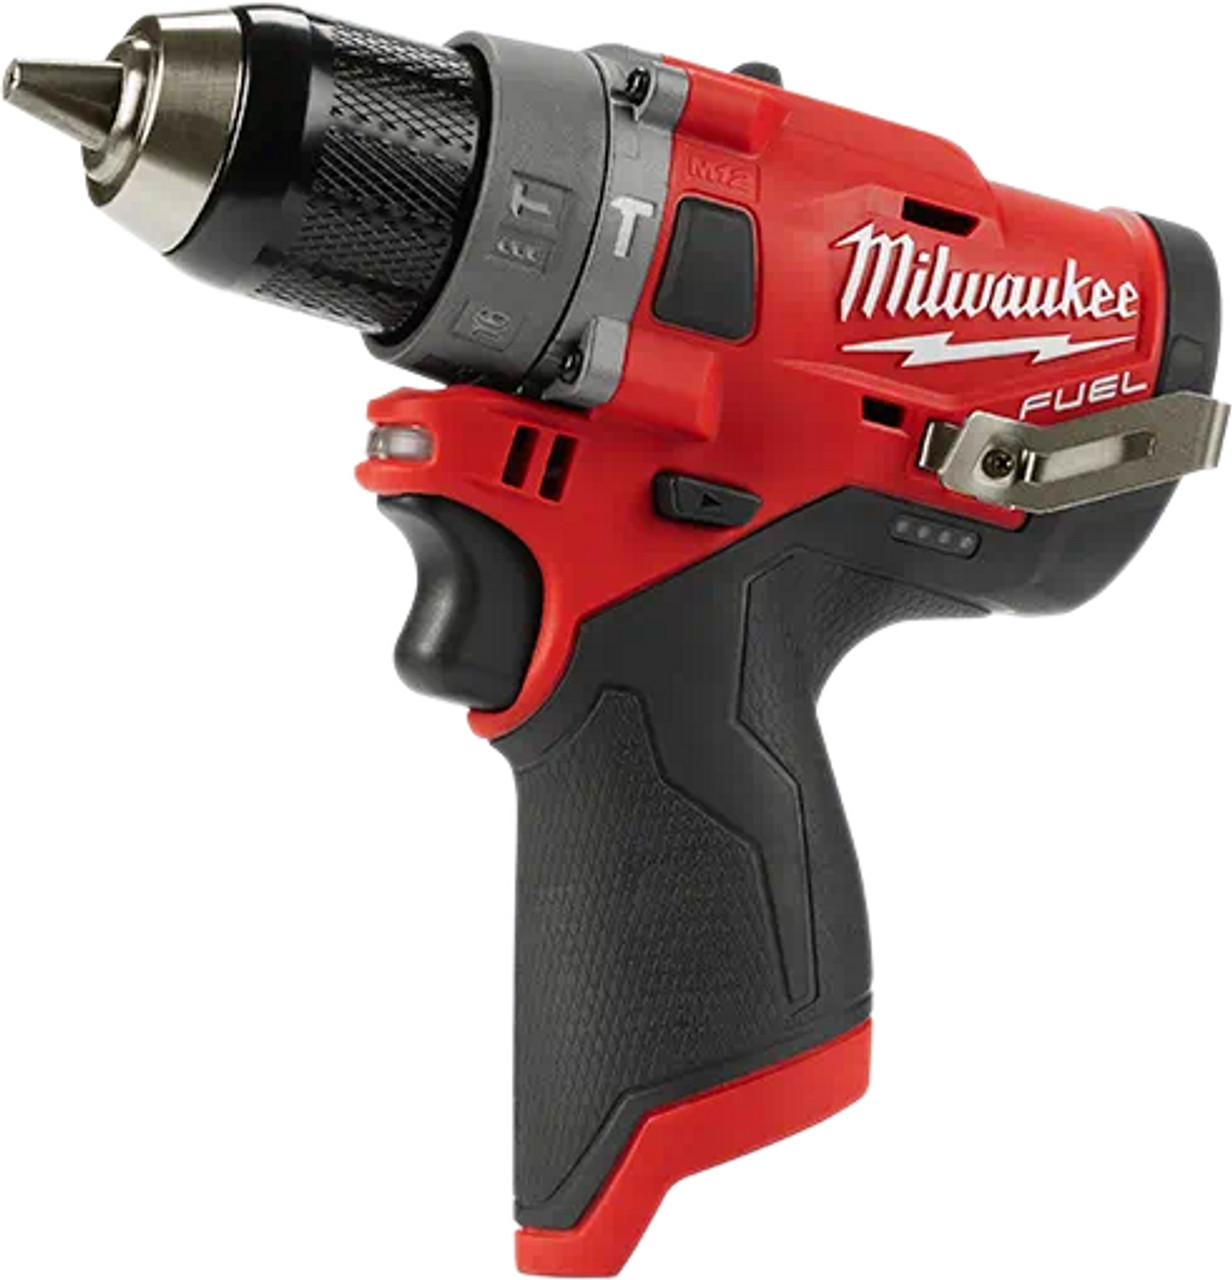 M12 FUEL? 2-Tool Combo Kit: 1/2" Hammer Drill and 1/4" Hex Impact Driver